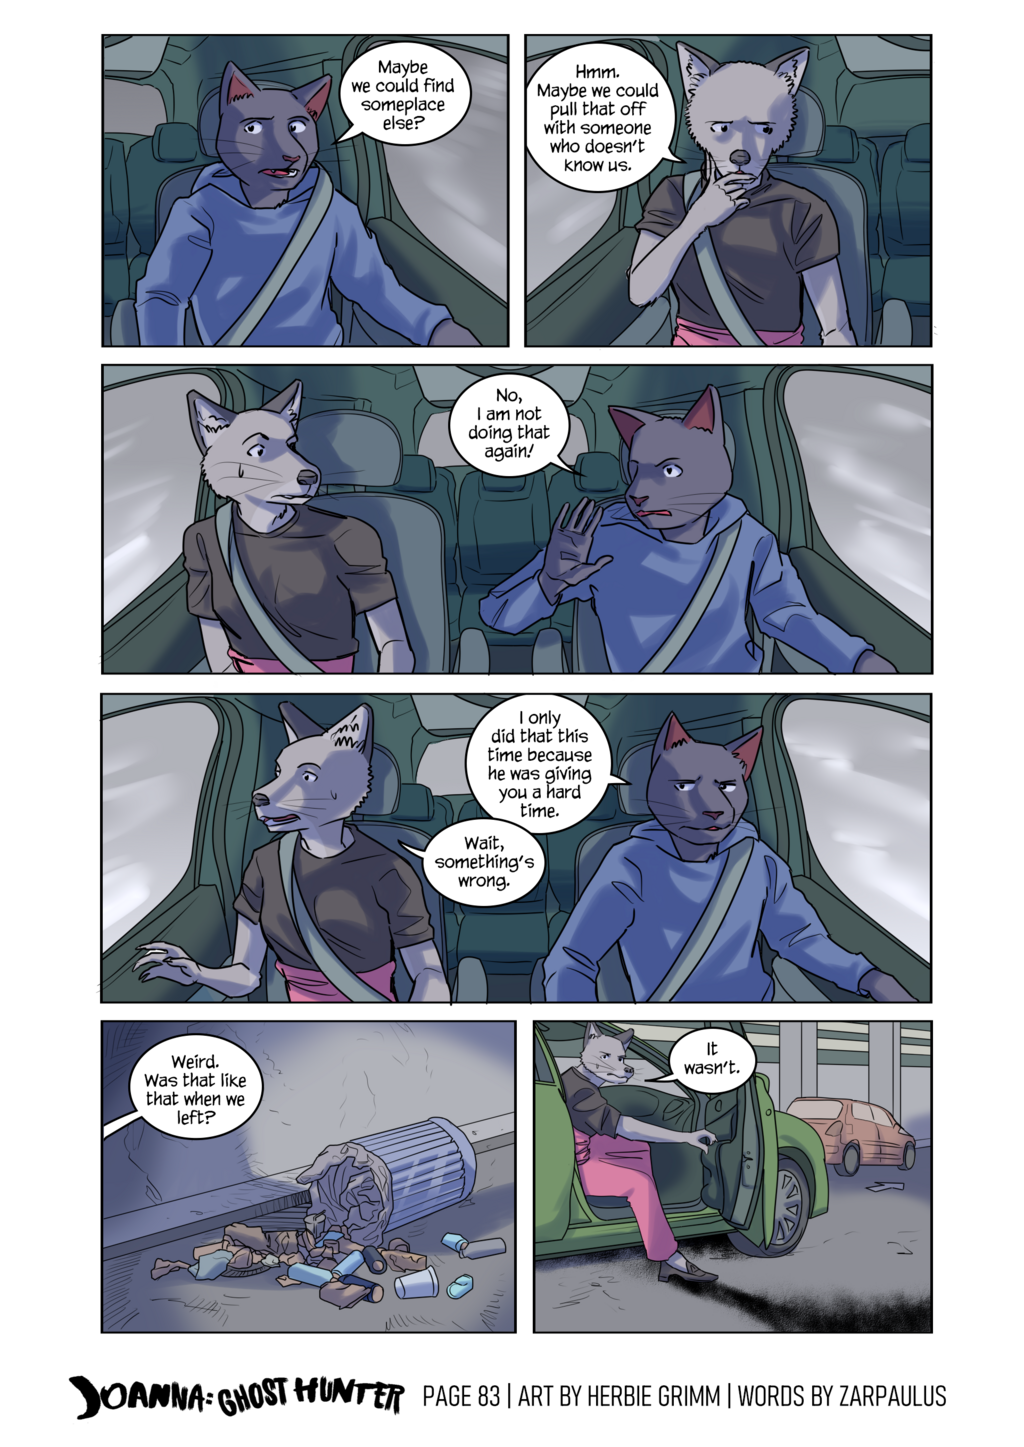 Most recent image: Crossing the Threshold page 28